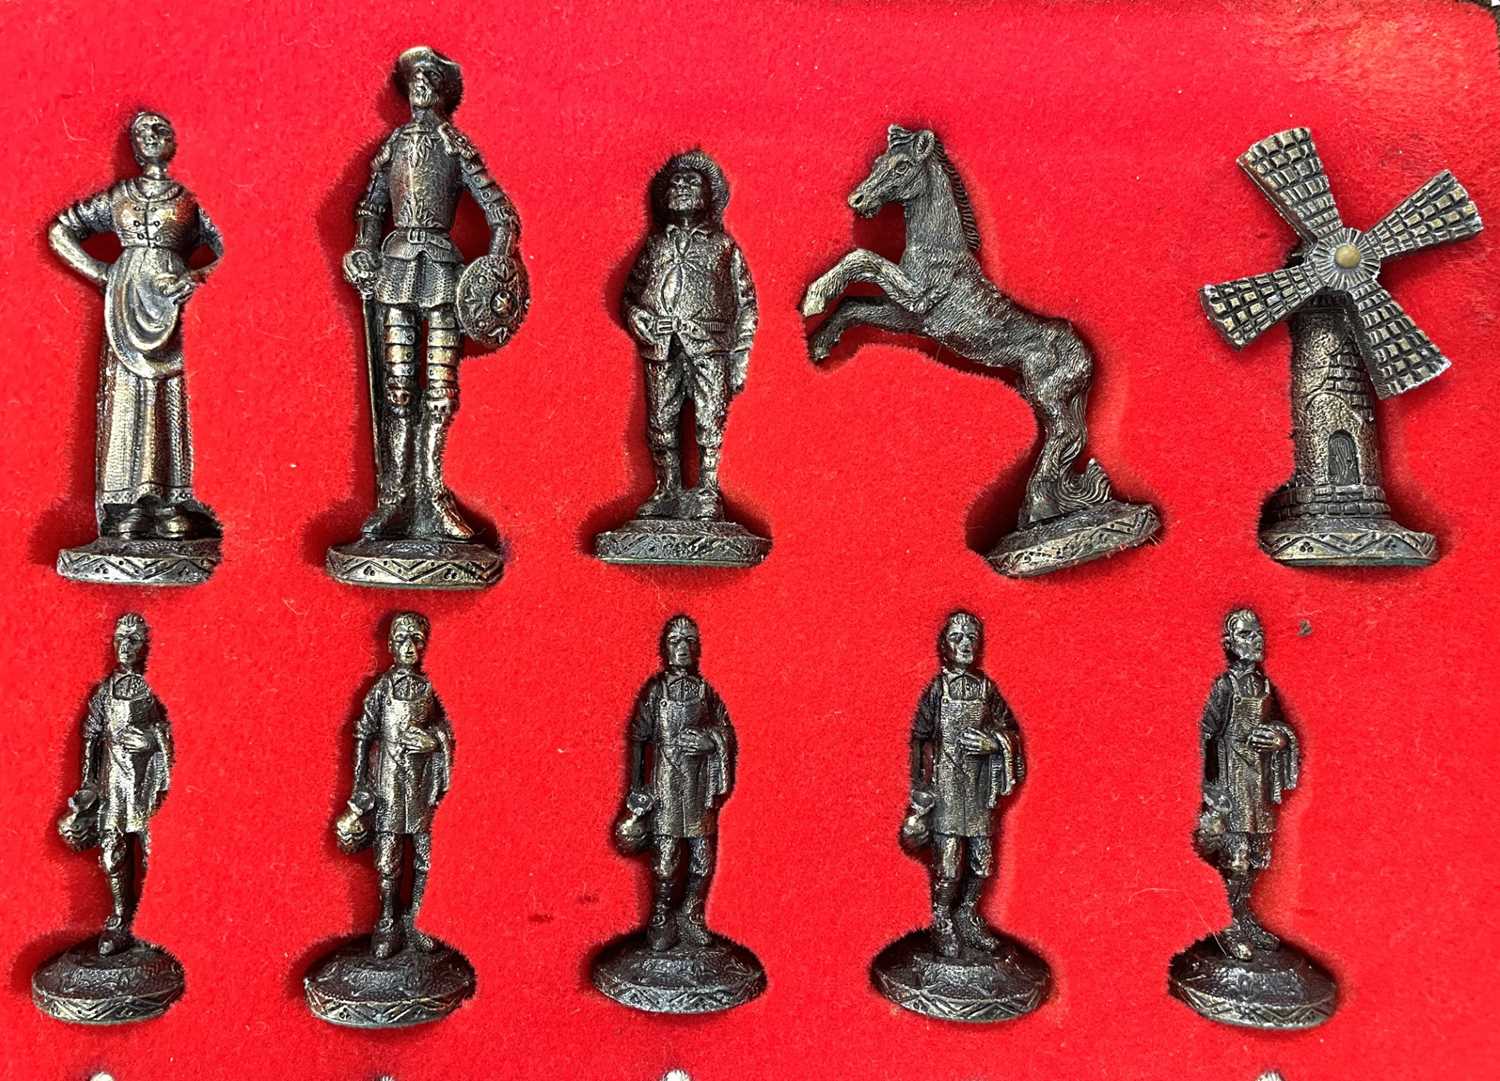 A metal chess set, formed as characters from Don Quixote. Rooks are windmills with rotating blades. - Image 3 of 5